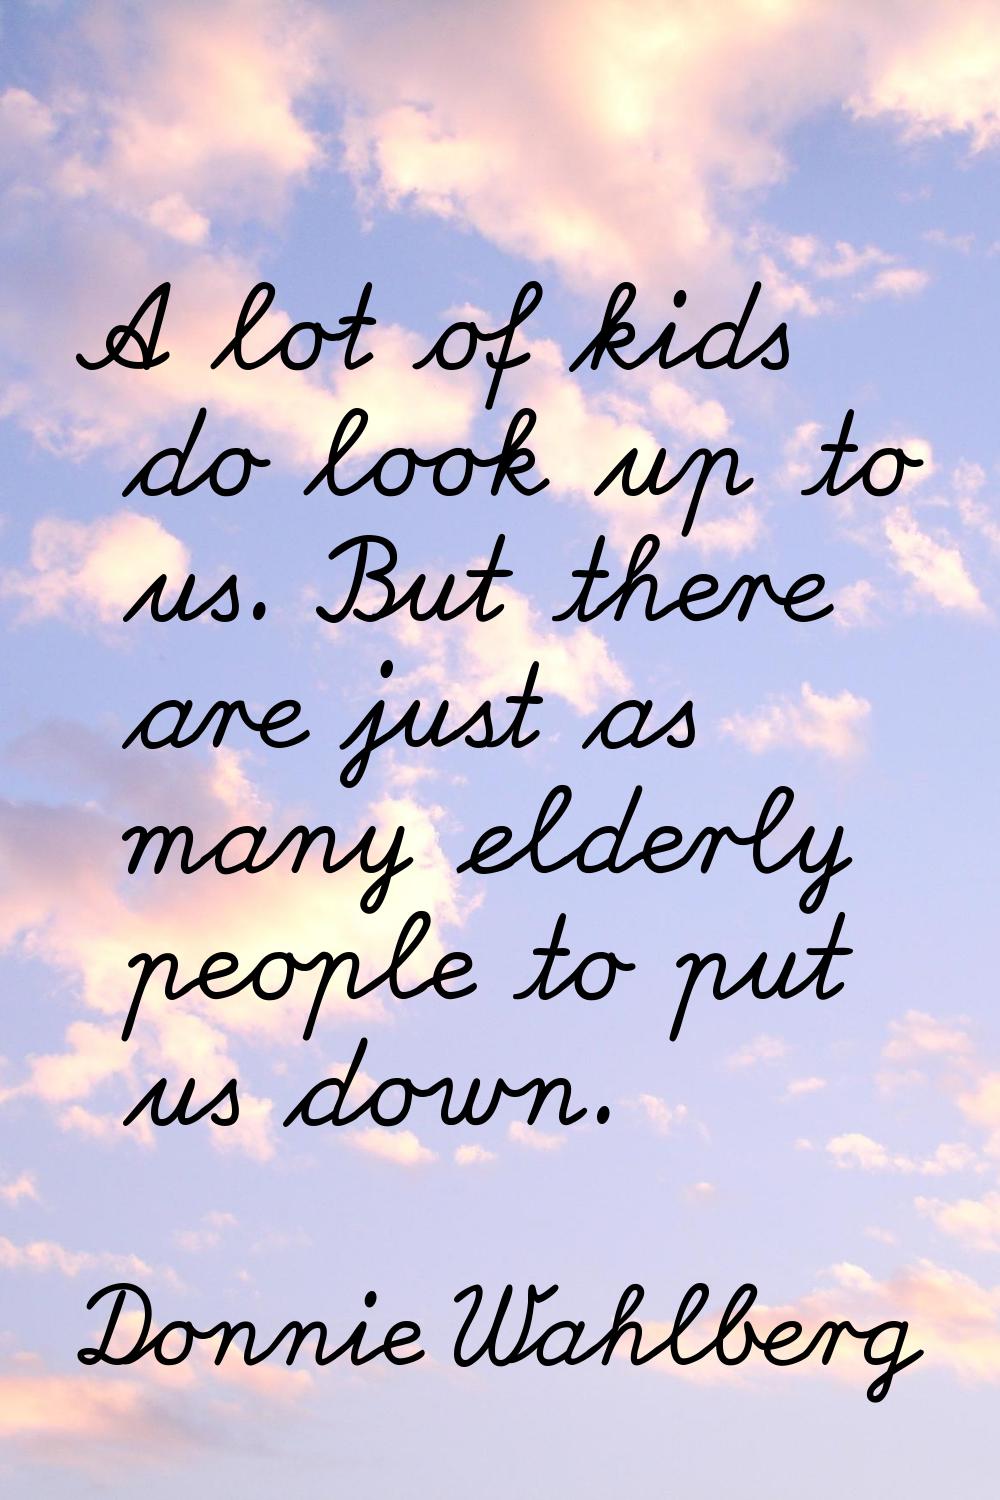 A lot of kids do look up to us. But there are just as many elderly people to put us down.